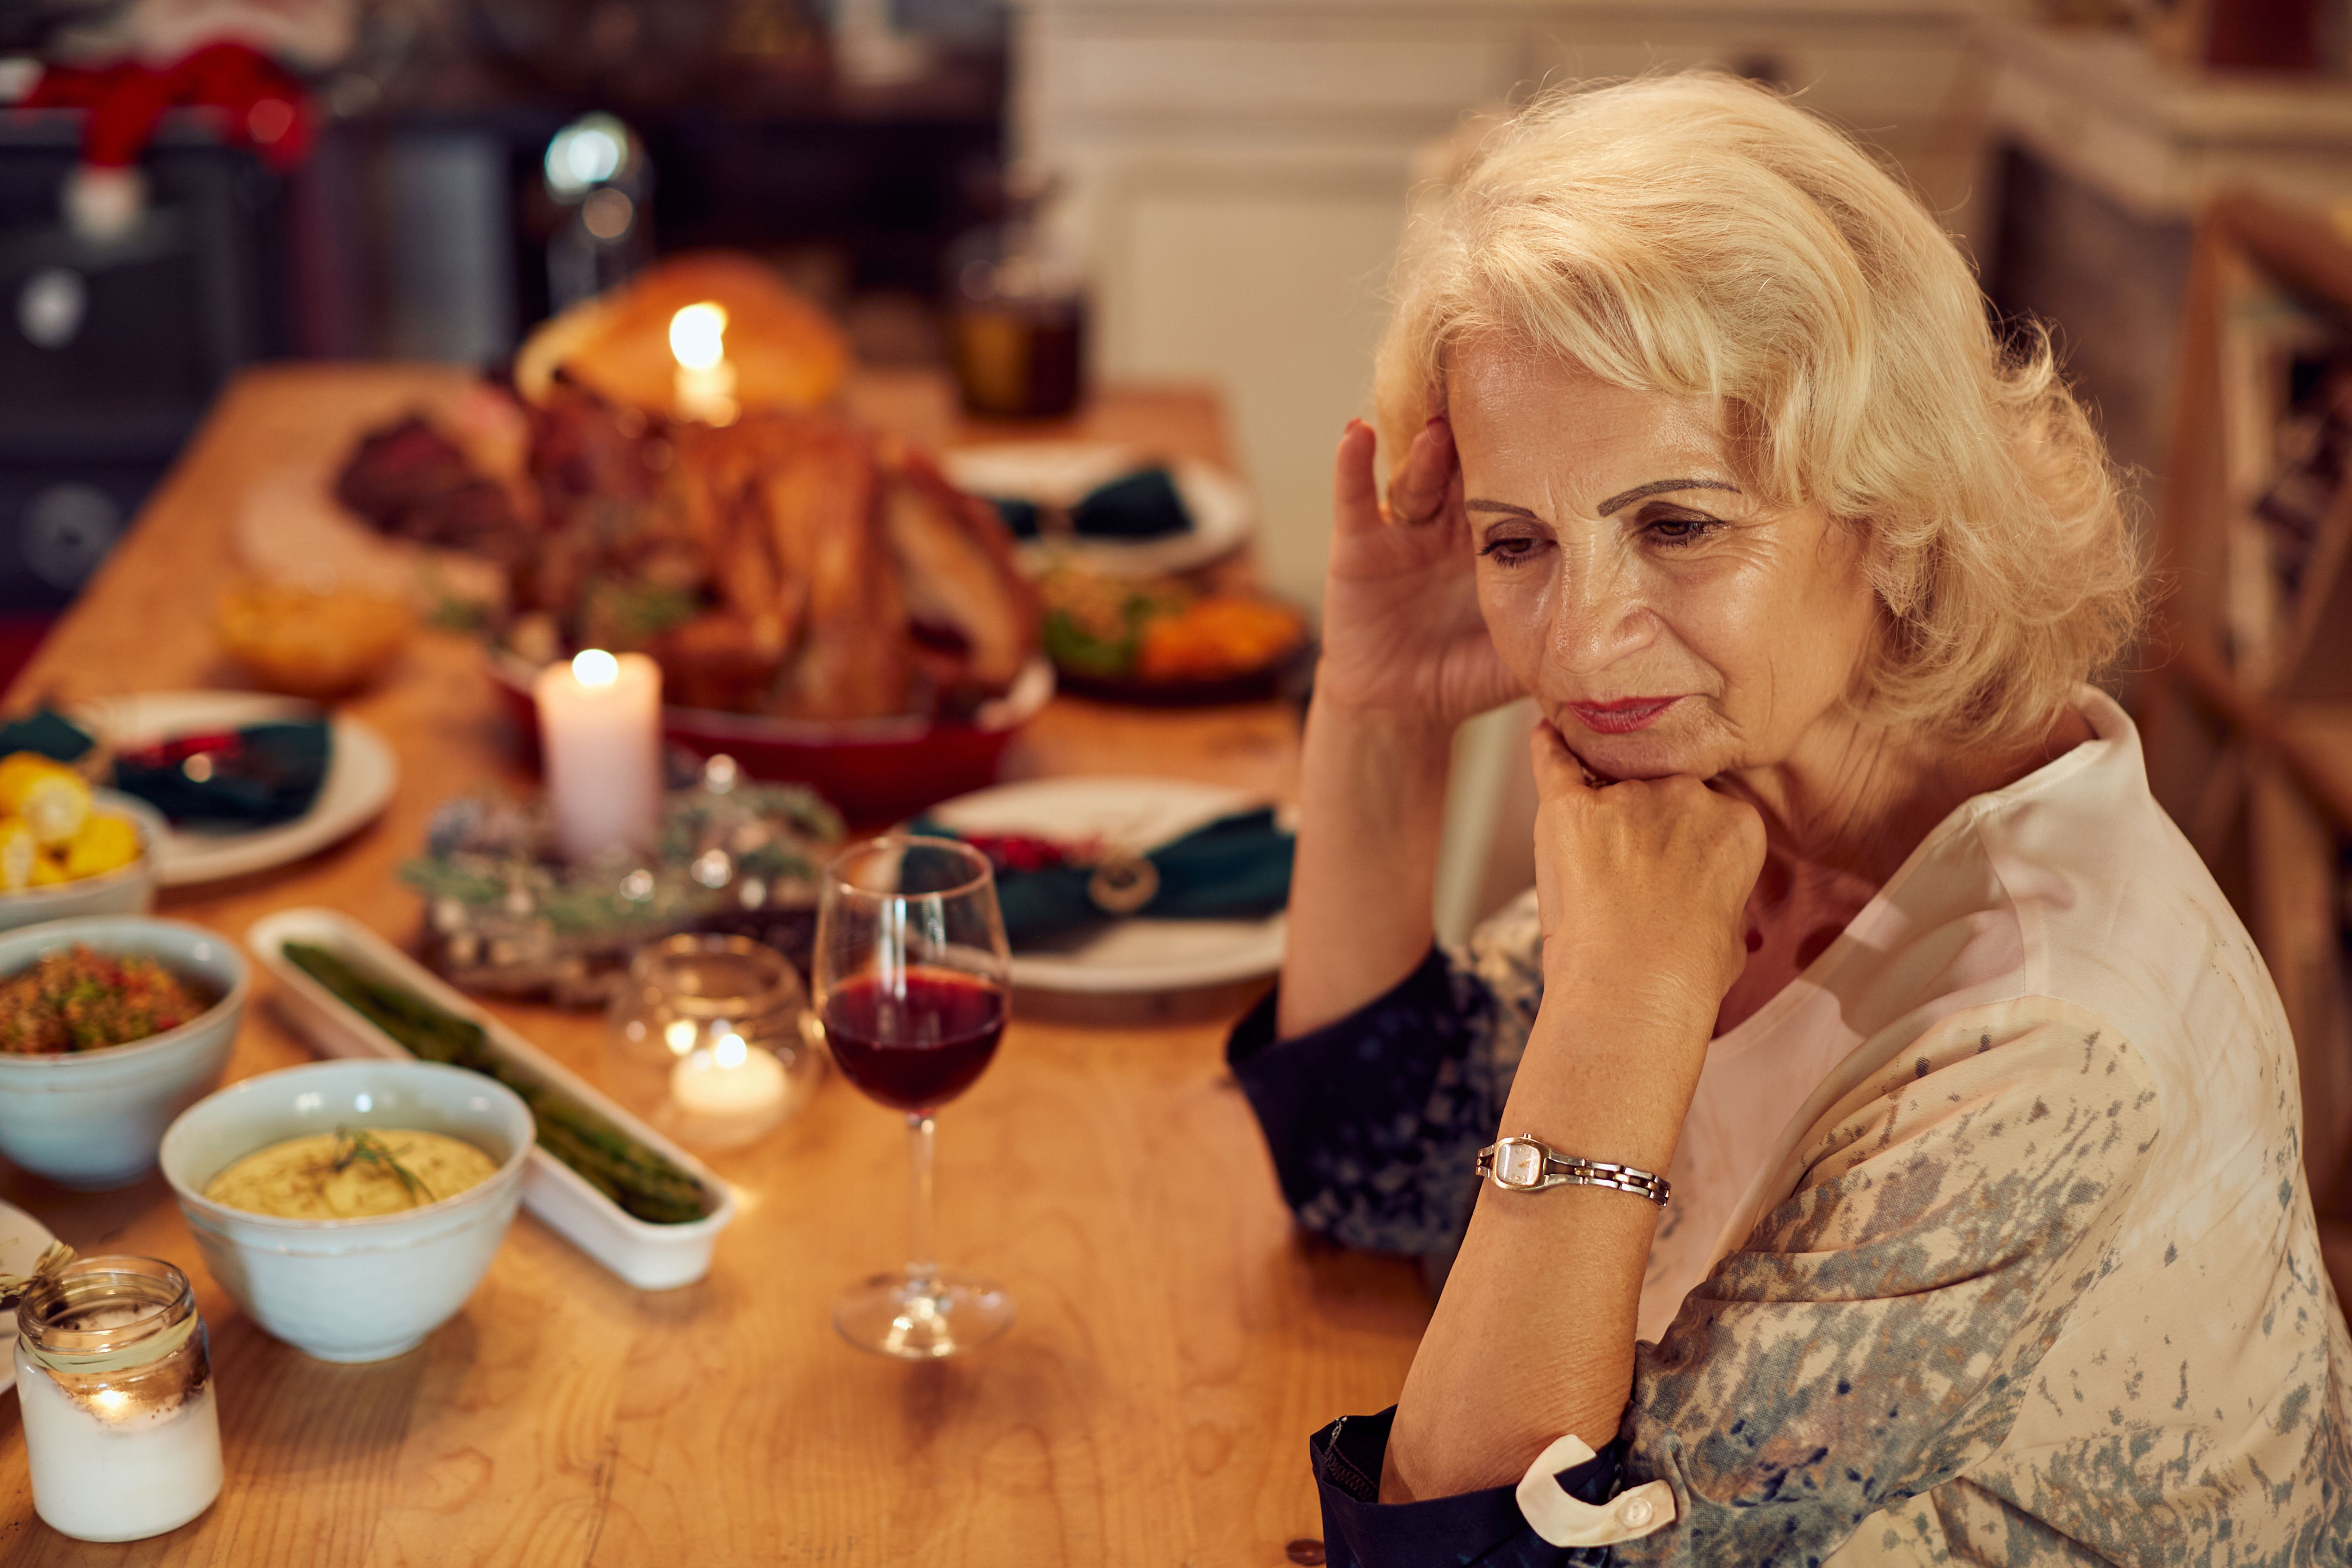 An elder woman upset at a dinner table. | Source: Getty Images